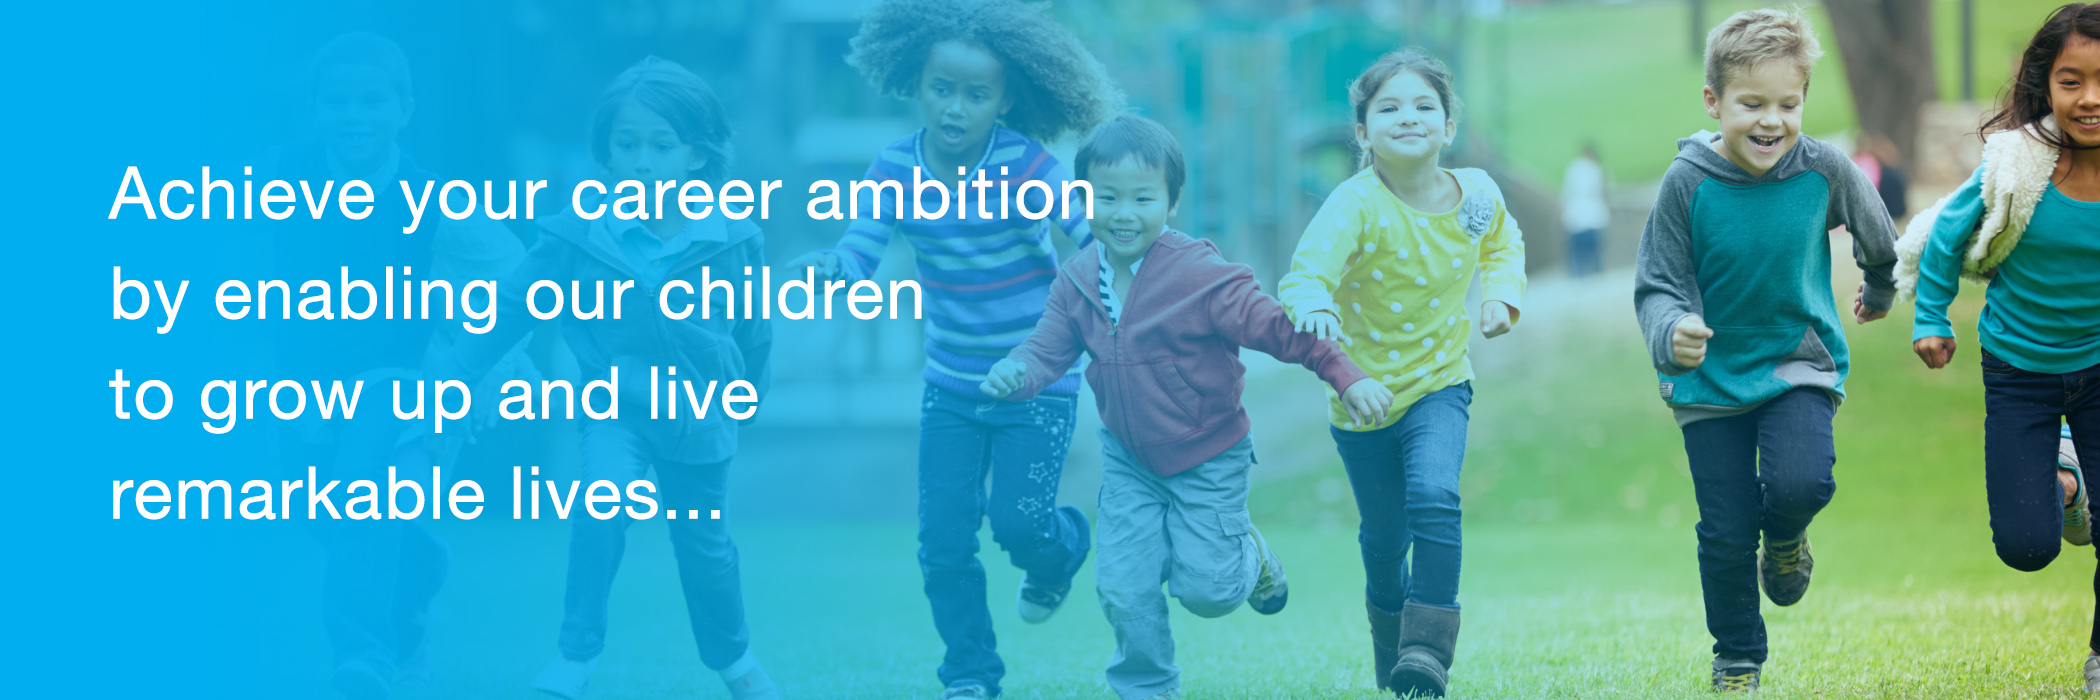 Achieve your career ambition by enabling our children to grow up and live remarkable lives...